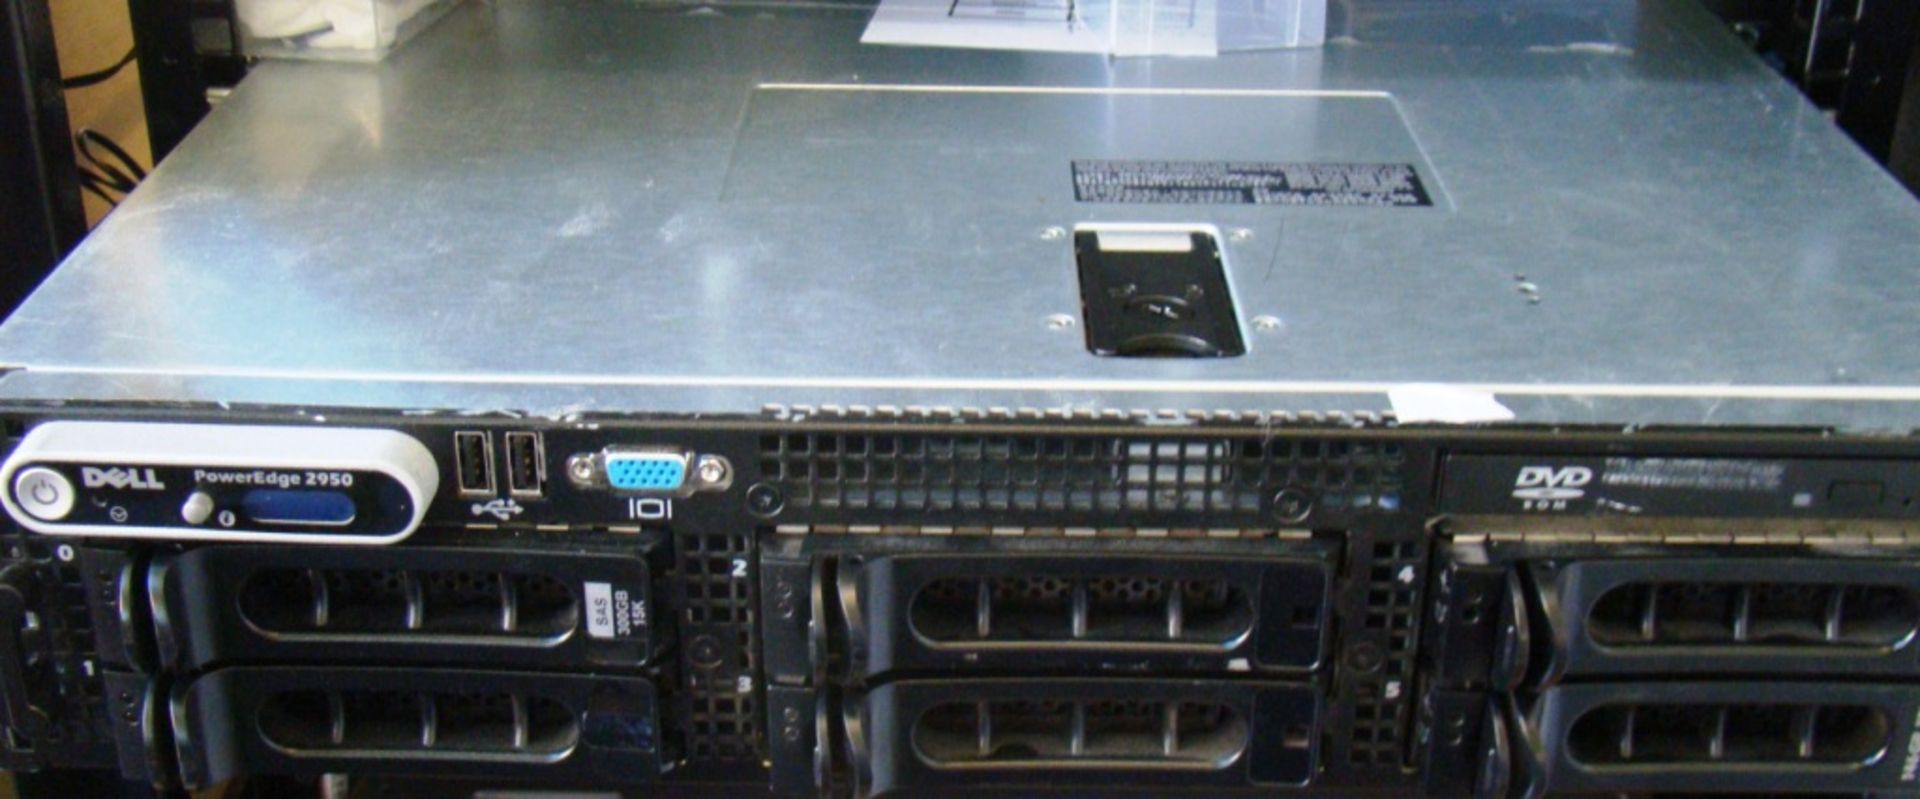 Dell 2950 Poweredge 2 * 3.00Ghz Quad Core 1333Mhz 32GB Memory 667Mhz 1* 132 GB HDD, 1 * 27 - Image 8 of 9